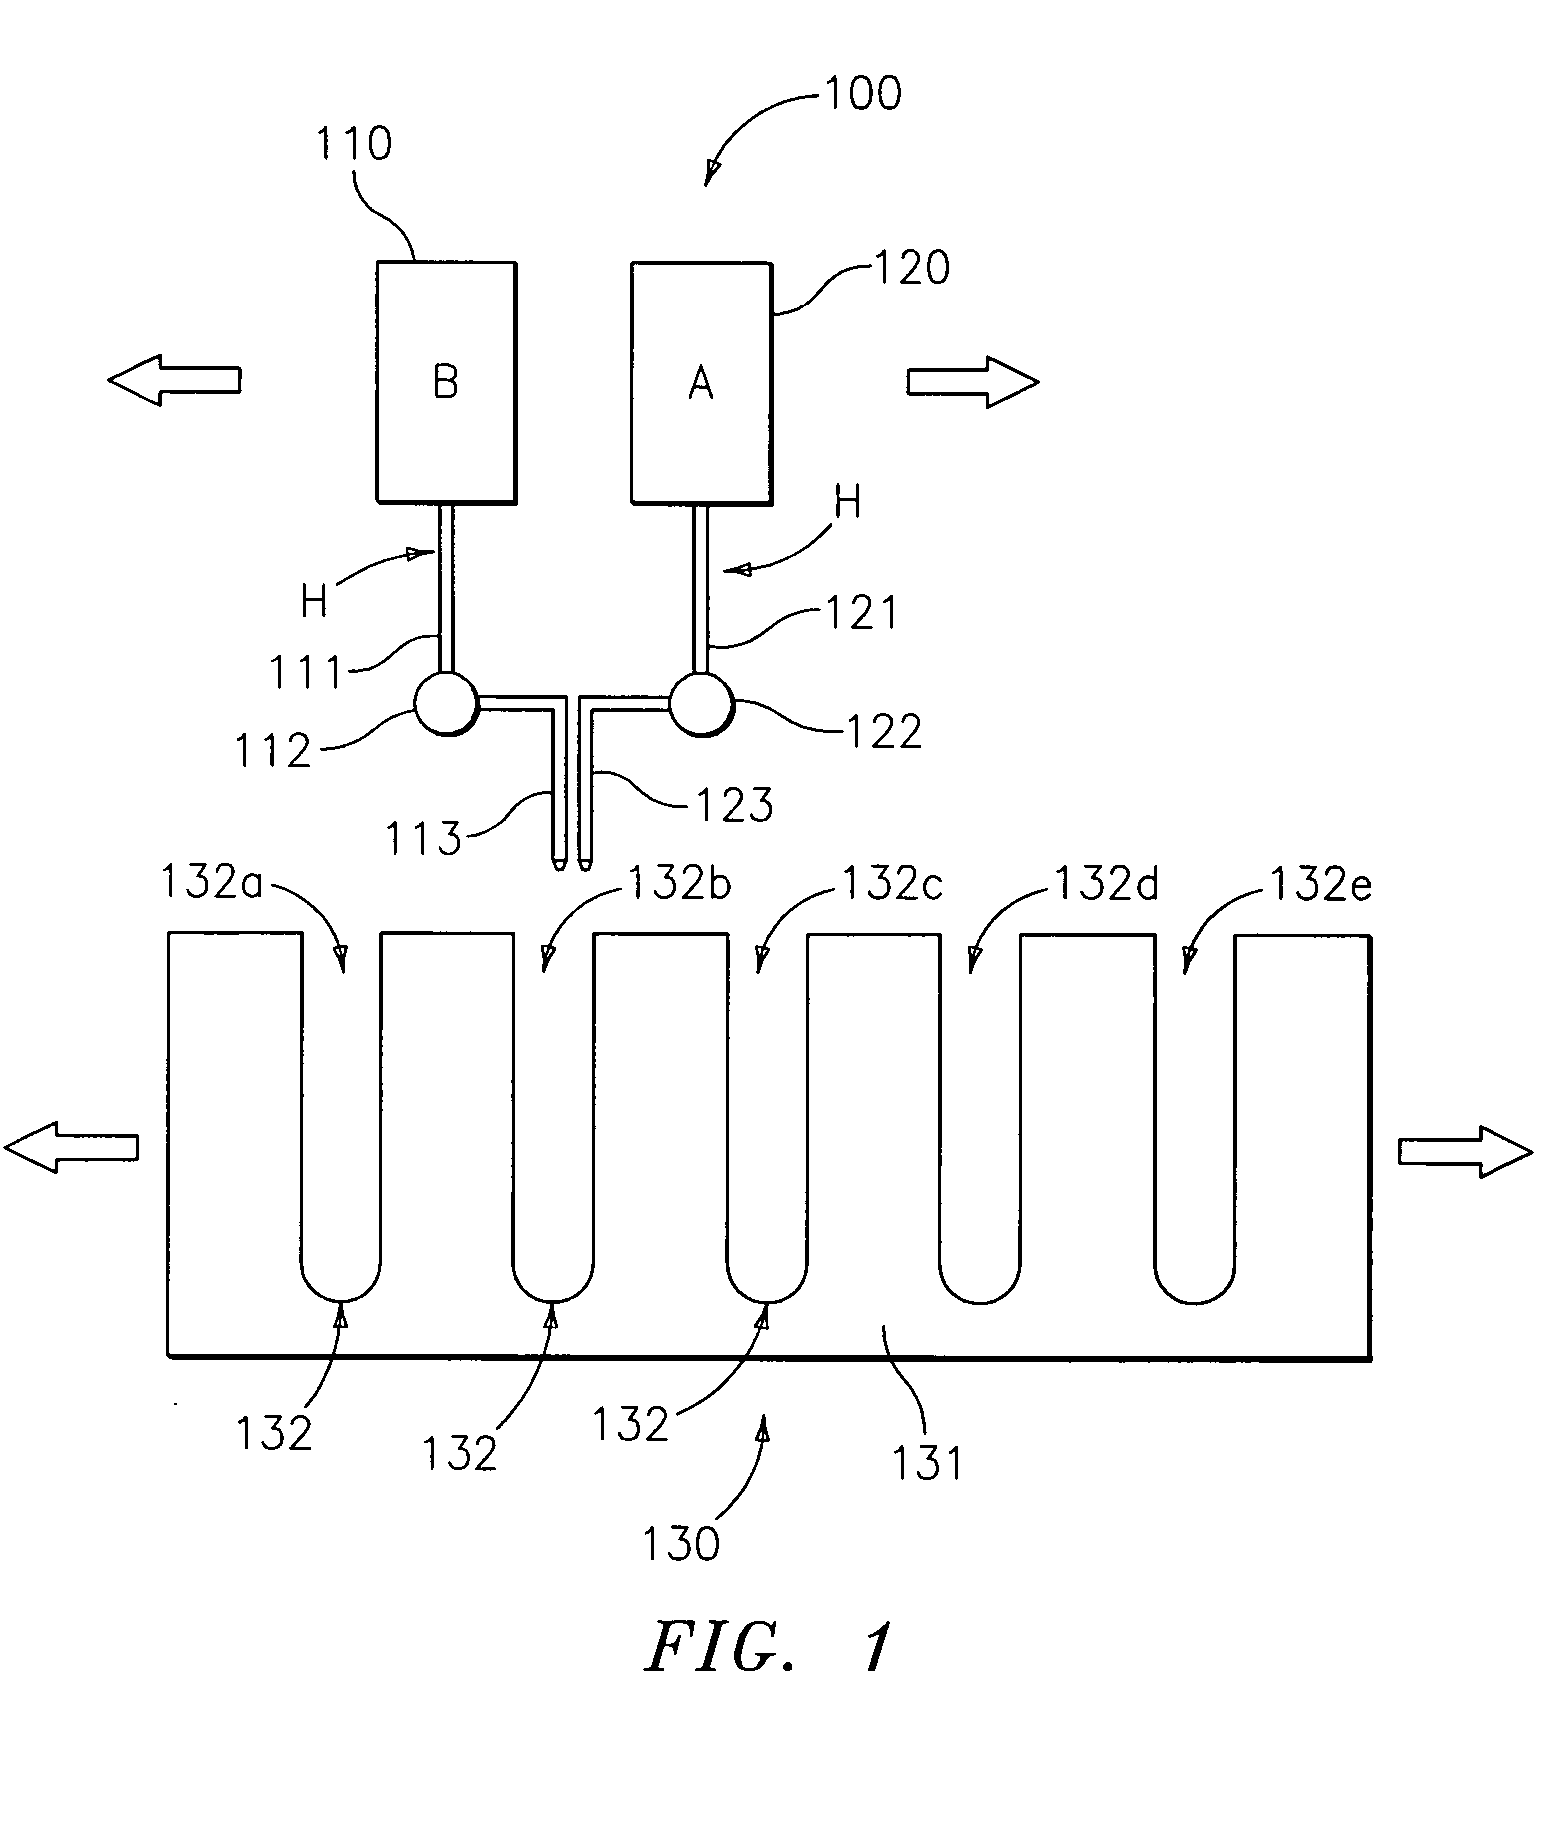 High throughput screening methods for lubricating oil compositions